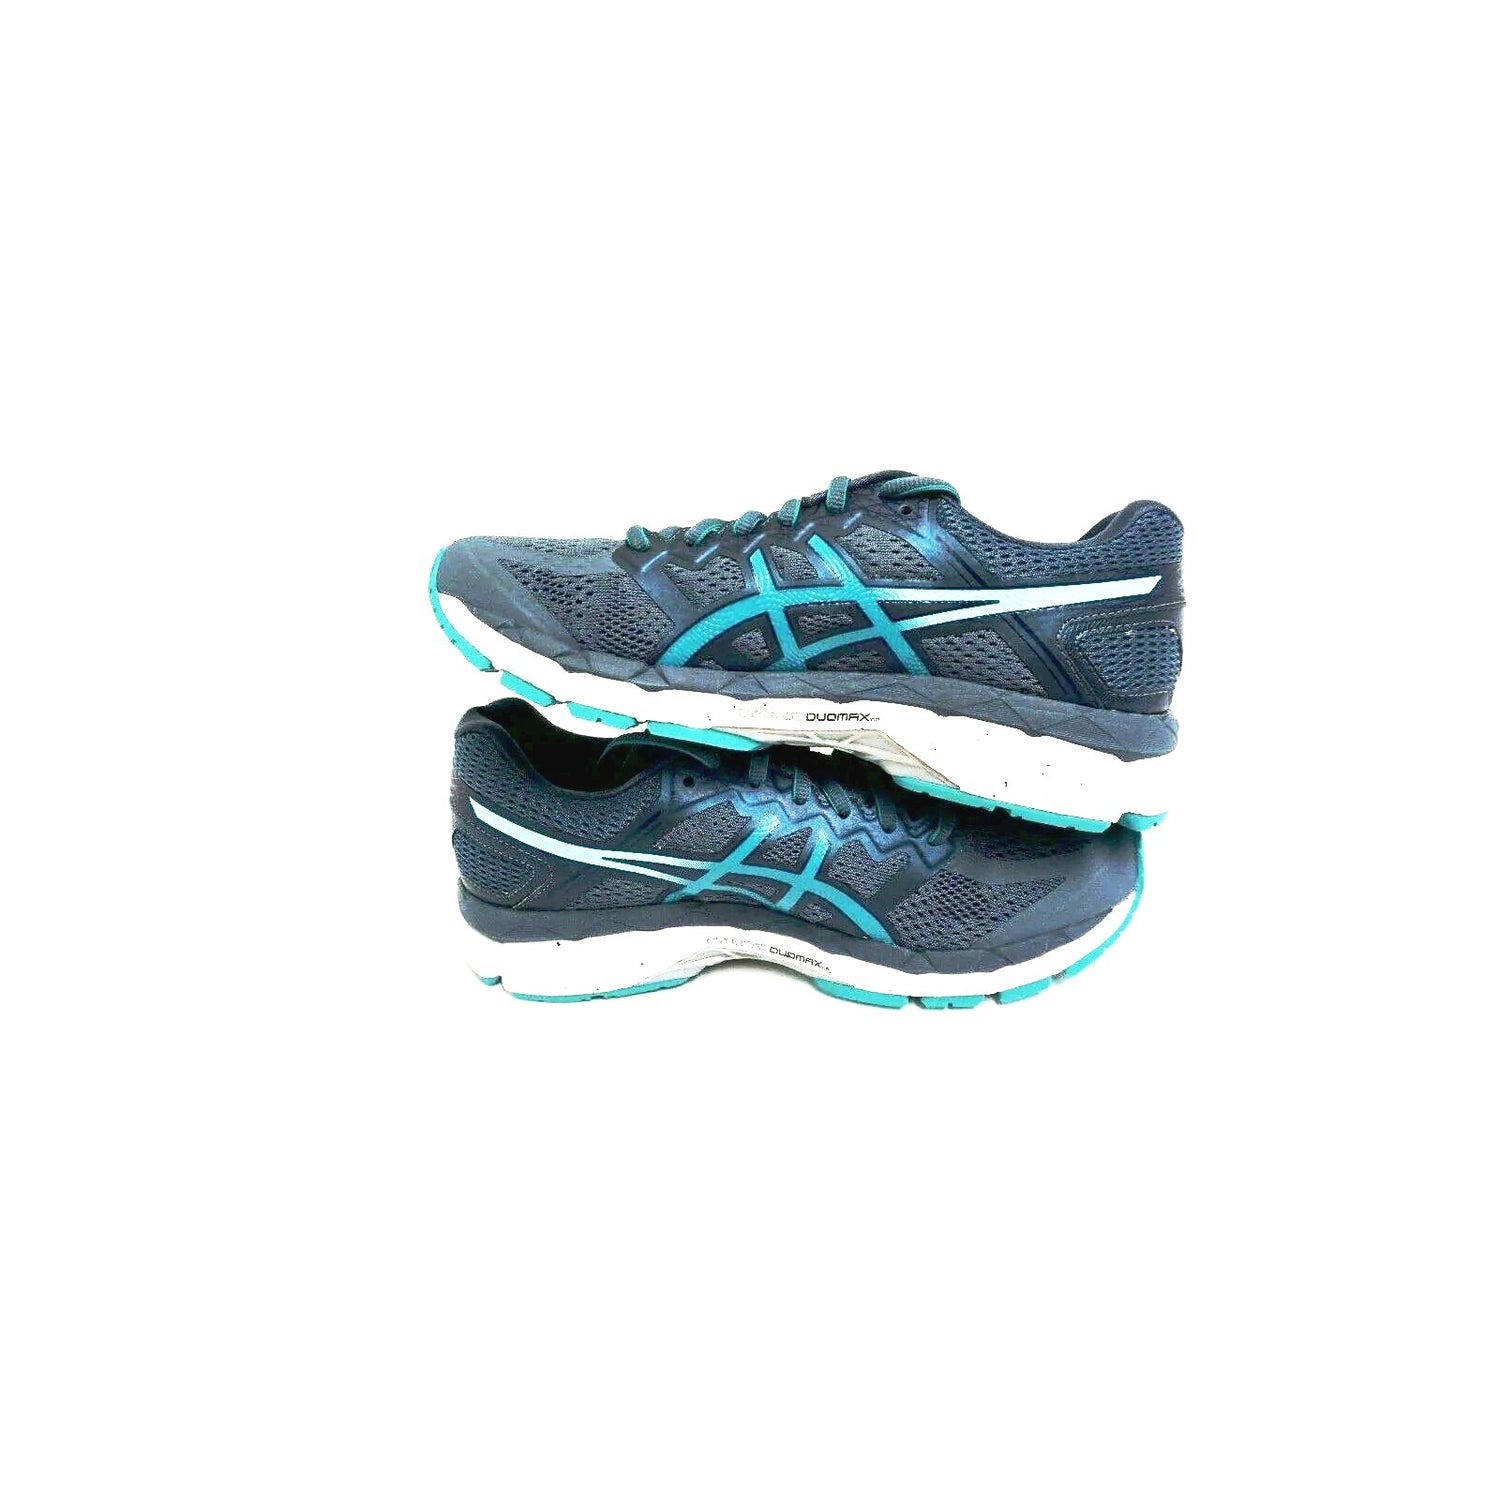 Womens Asics running shoes gel-superion smoke blue size 10 us new